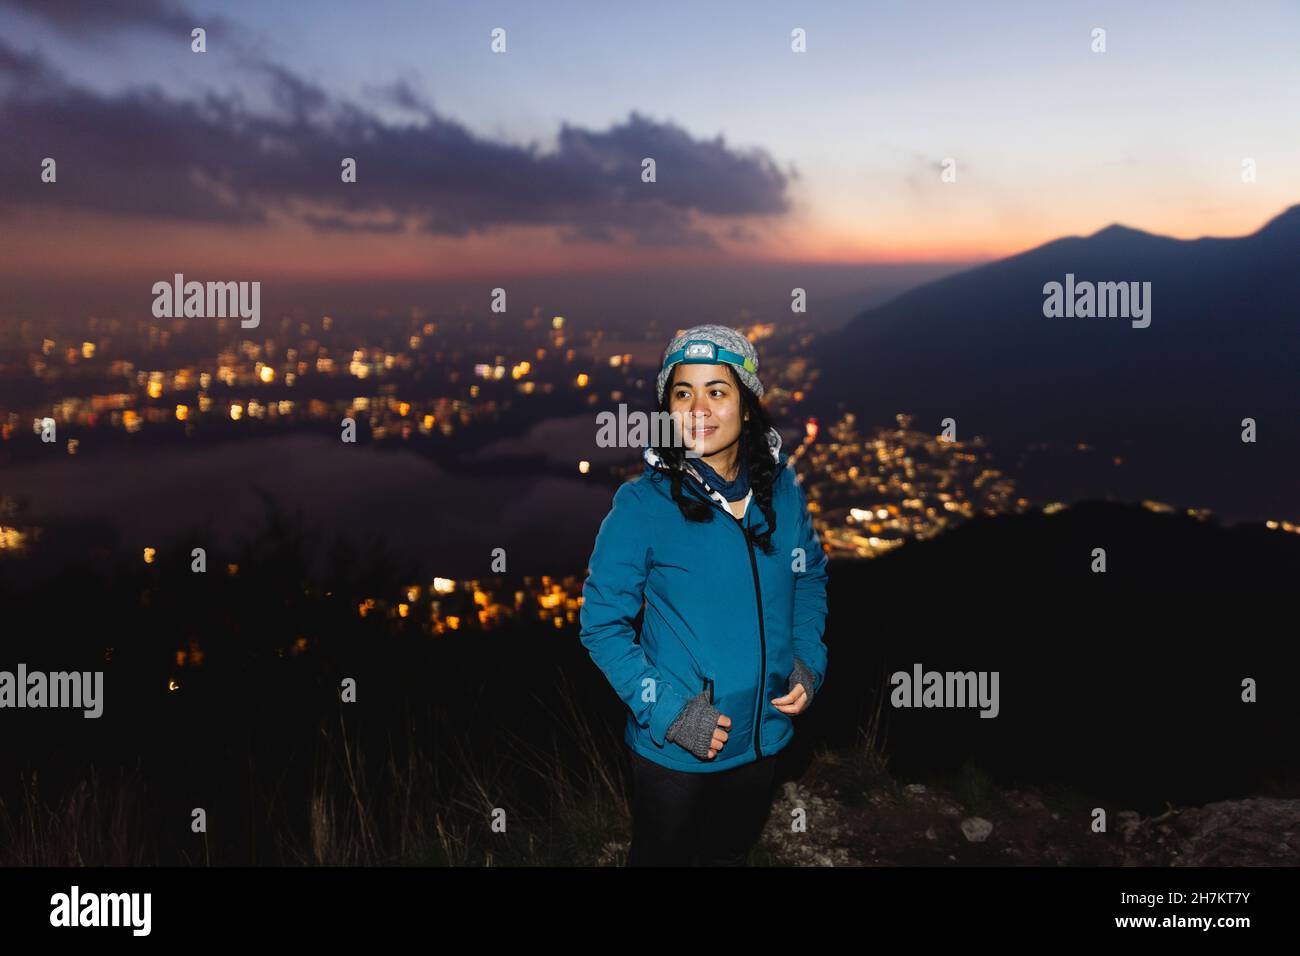 Young woman wearing head torch smiling on mountain Stock Photo